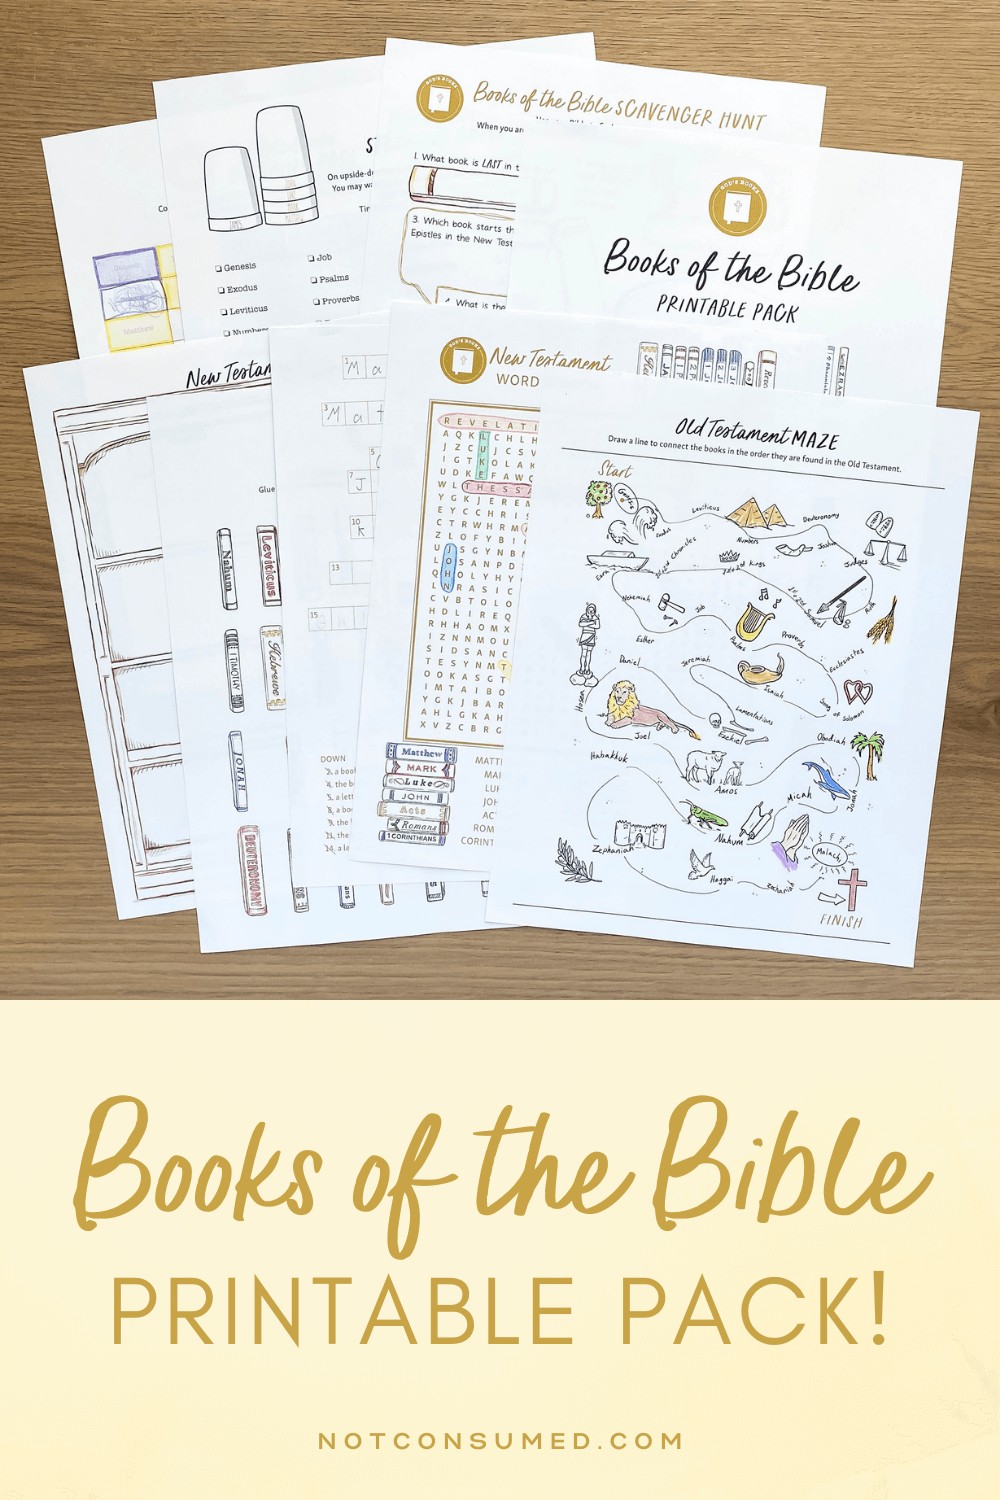 Books of the Bible Pin